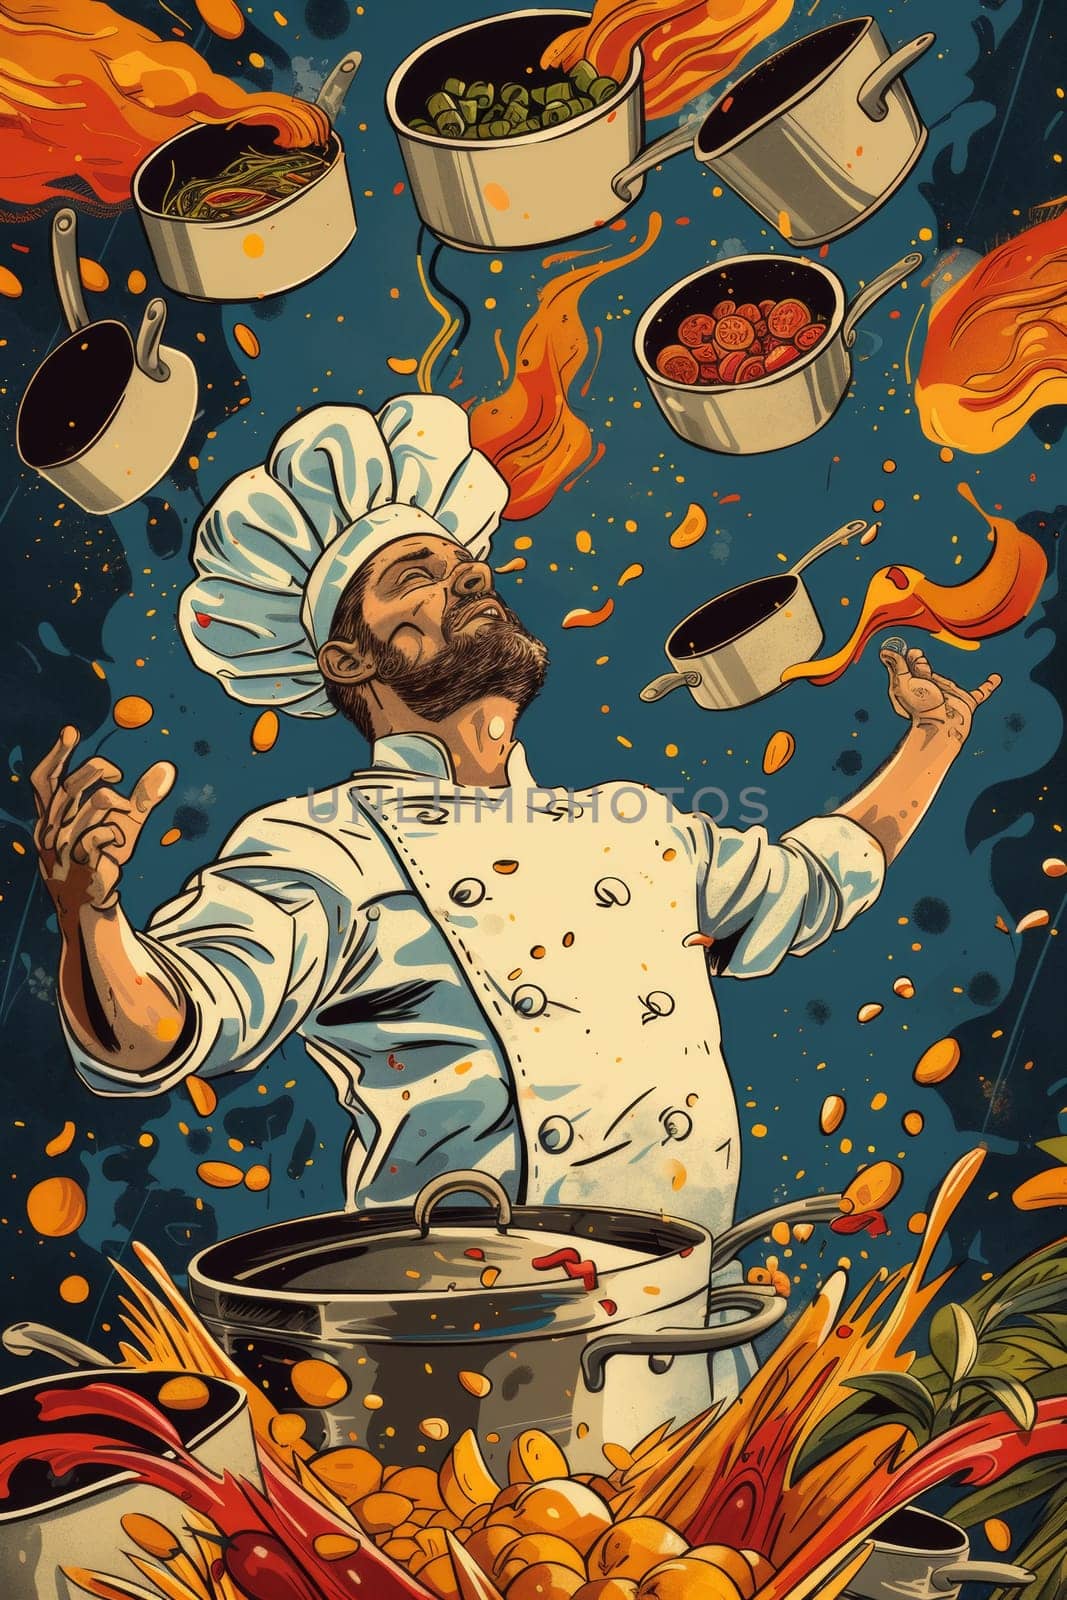 A chef in a cartoon illustration with pots of food flying around him